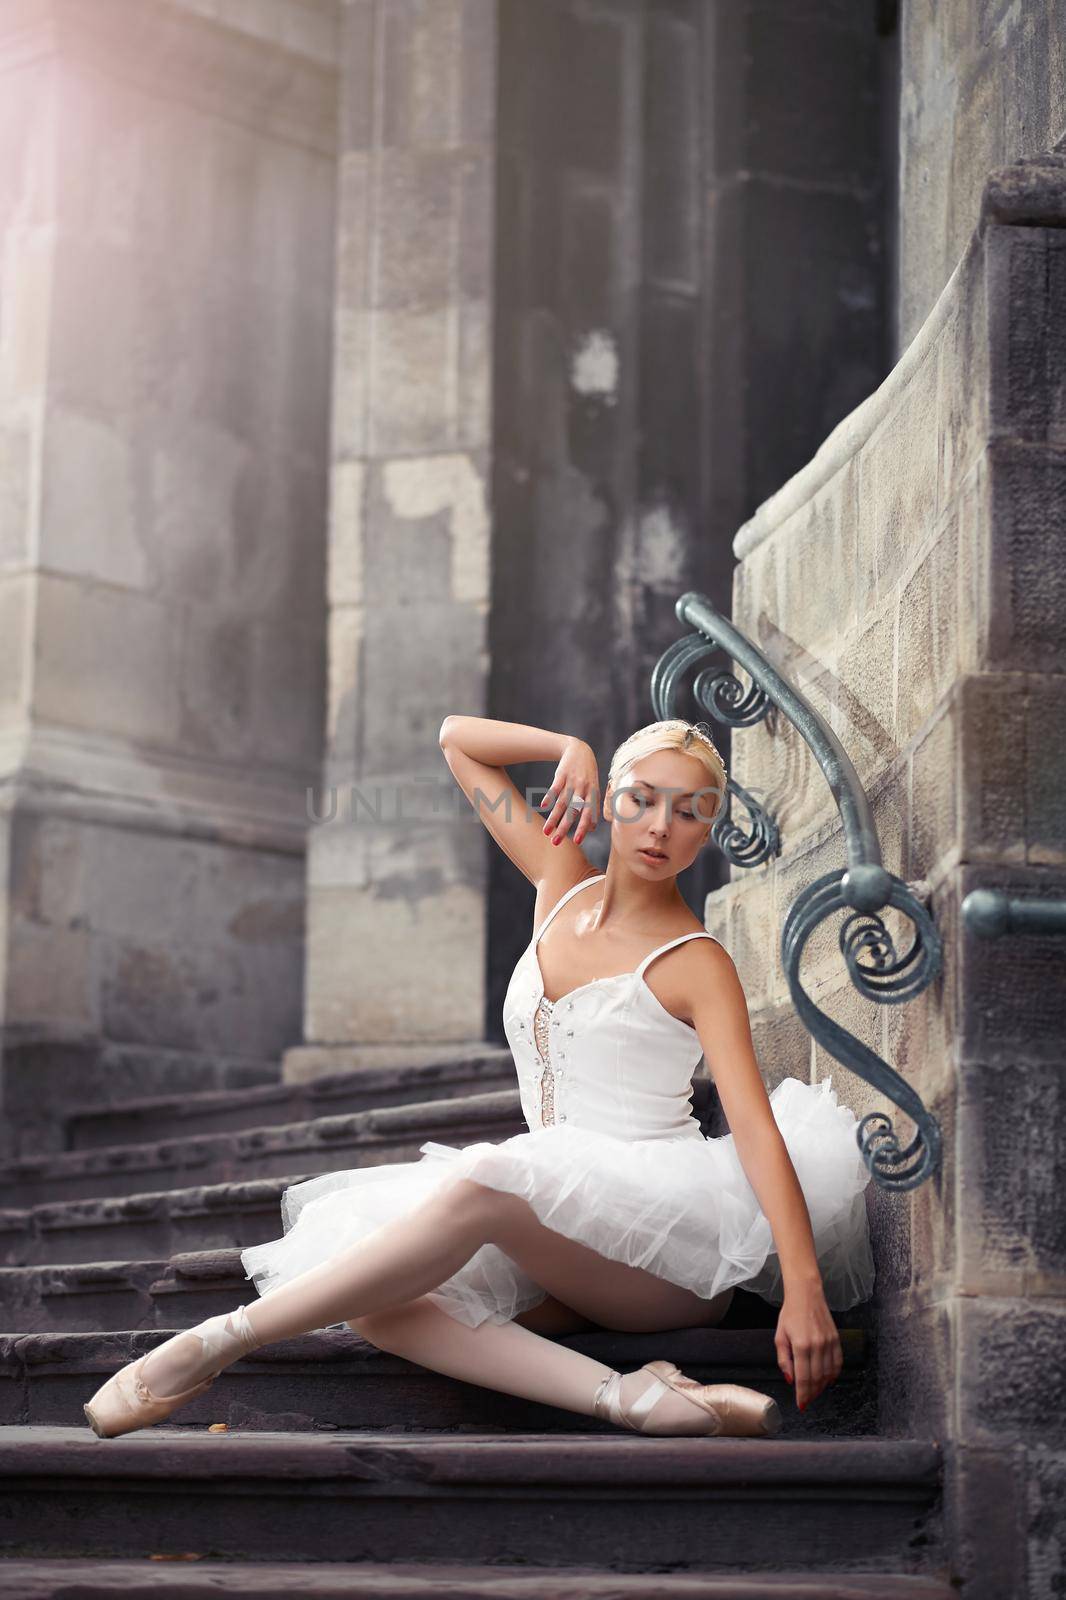 Ballet dreams. Beautiful young ballet dancer woman touching her face gracefully sitting on the stairs